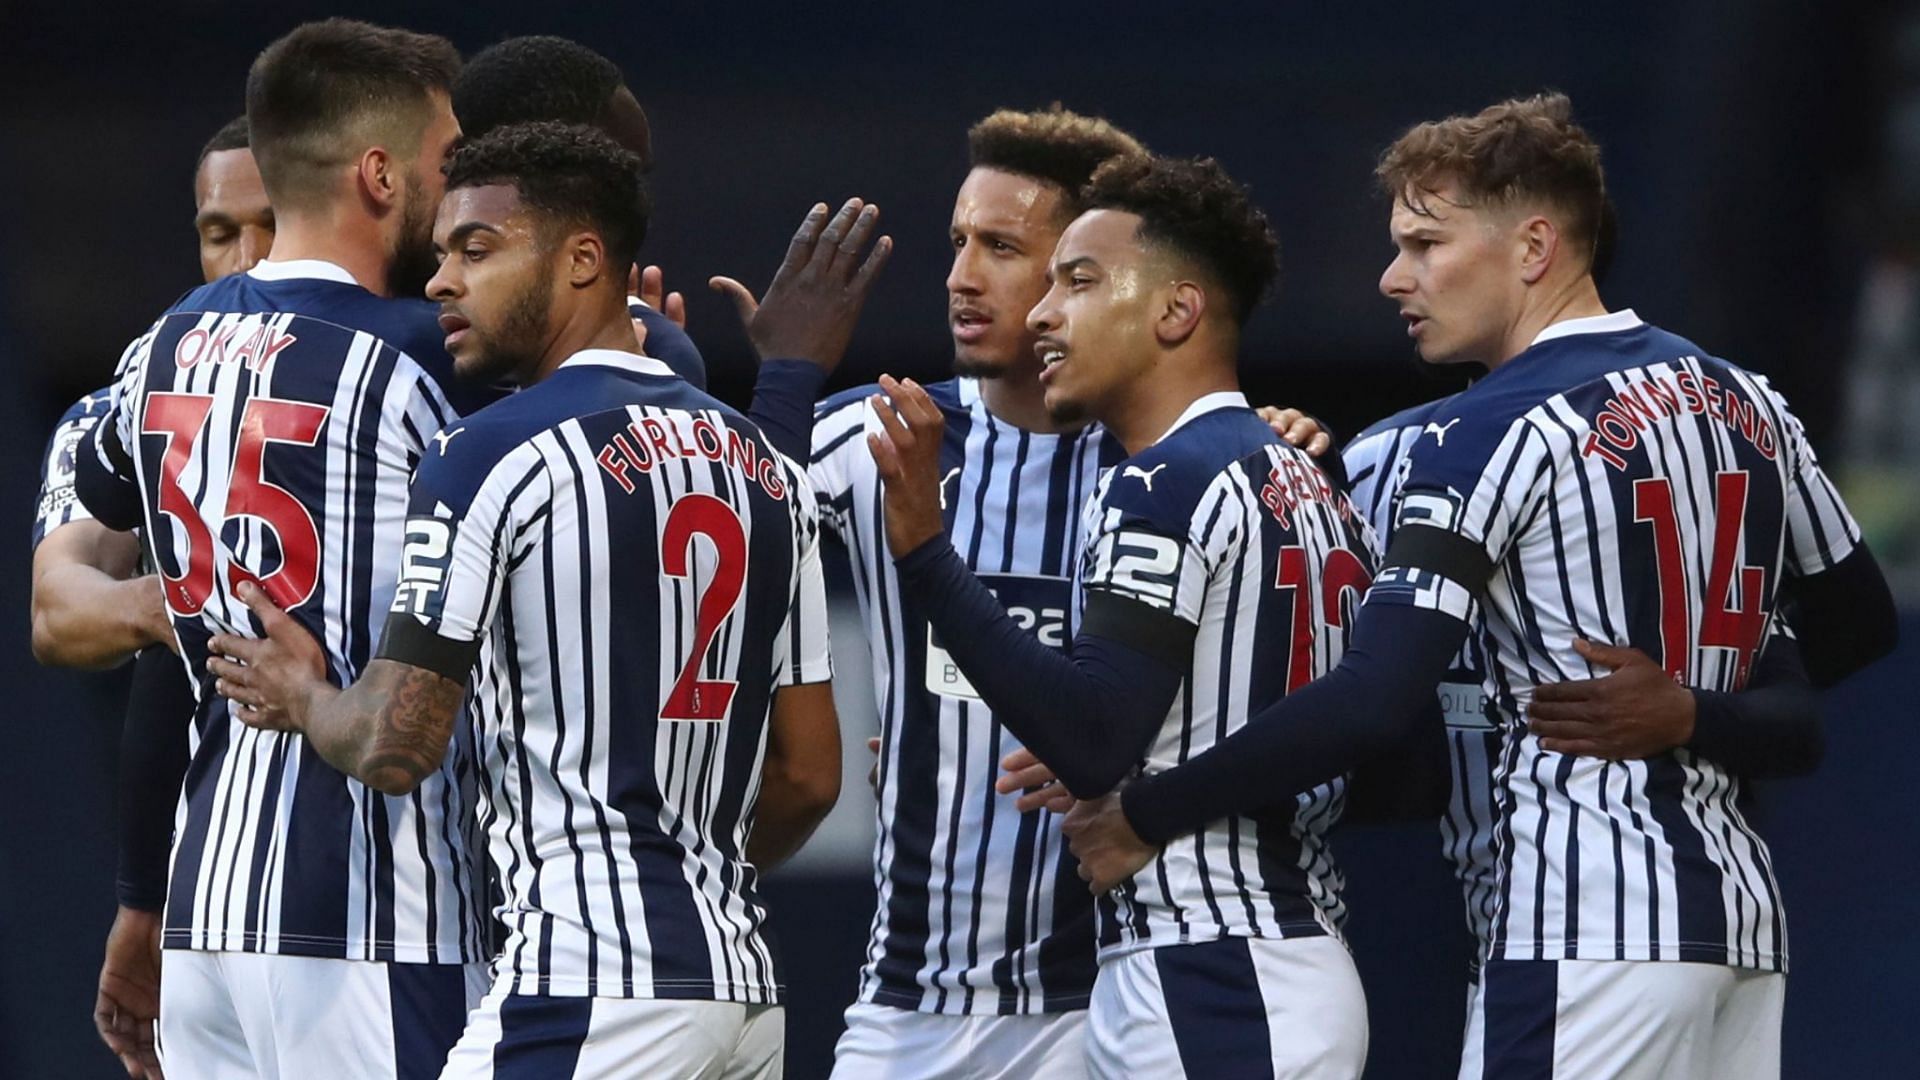 West Brom will have a lot to prove if they are to secure promotion.